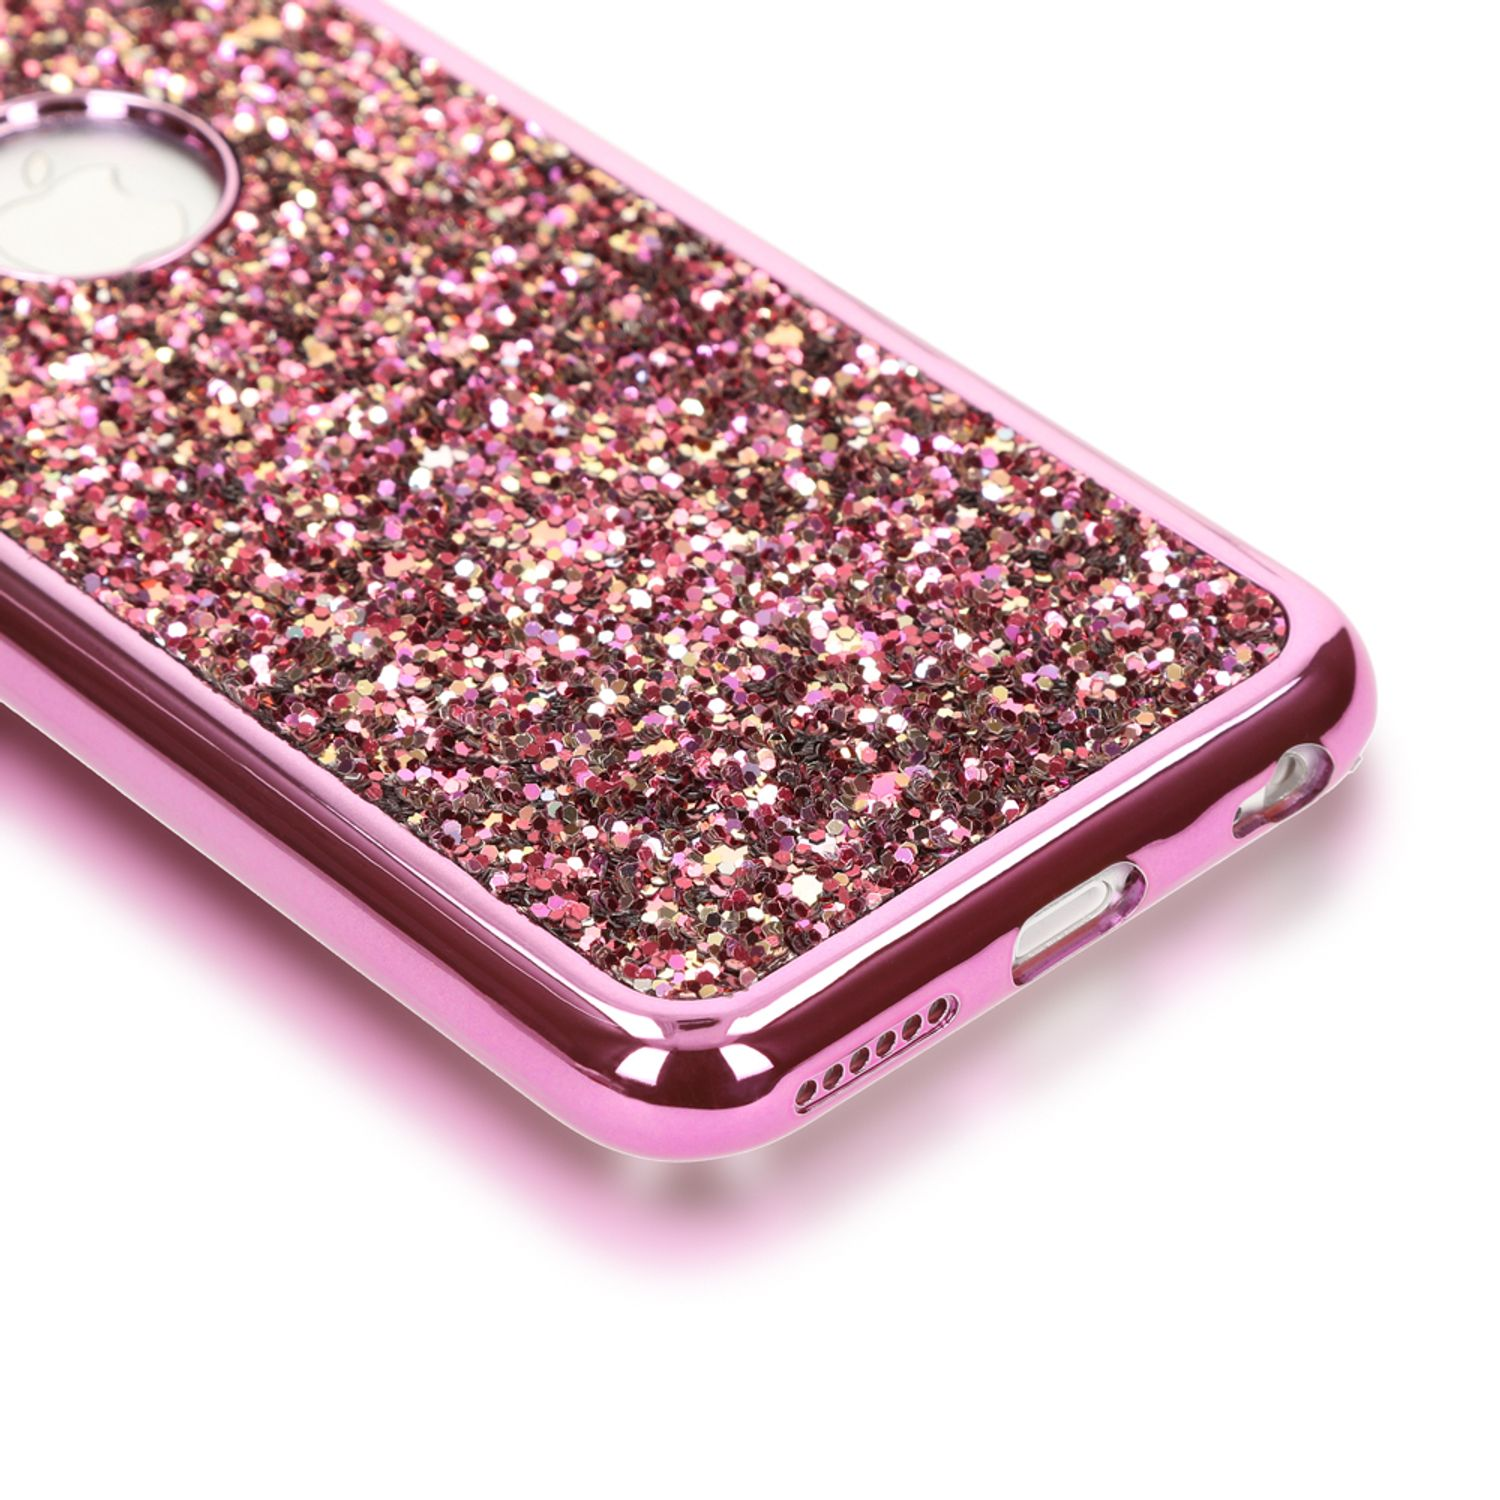 Hülle, iPhone Apple, Glitzer Silikon Backcover, 6s, 6 iPhone Mouse-Look NALIA Pink